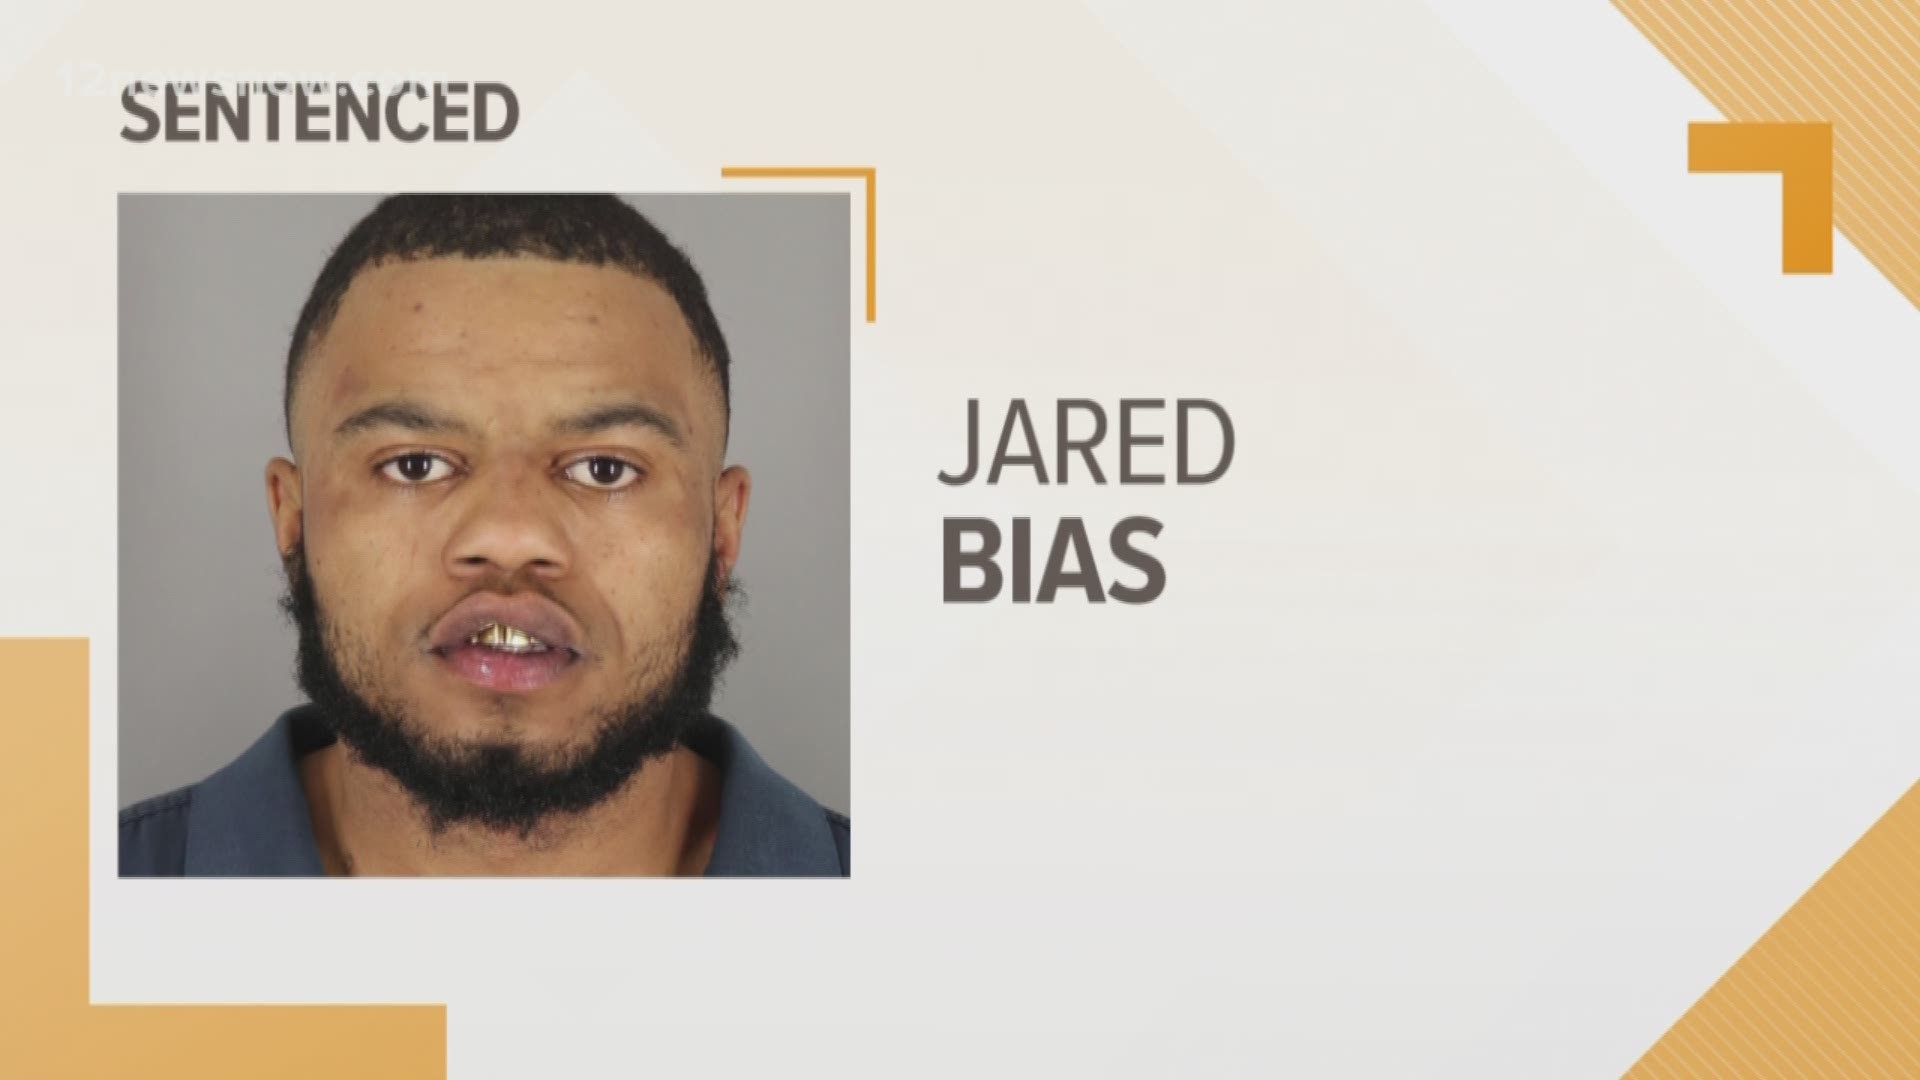 The murder charges against Jared Bias have been dropped